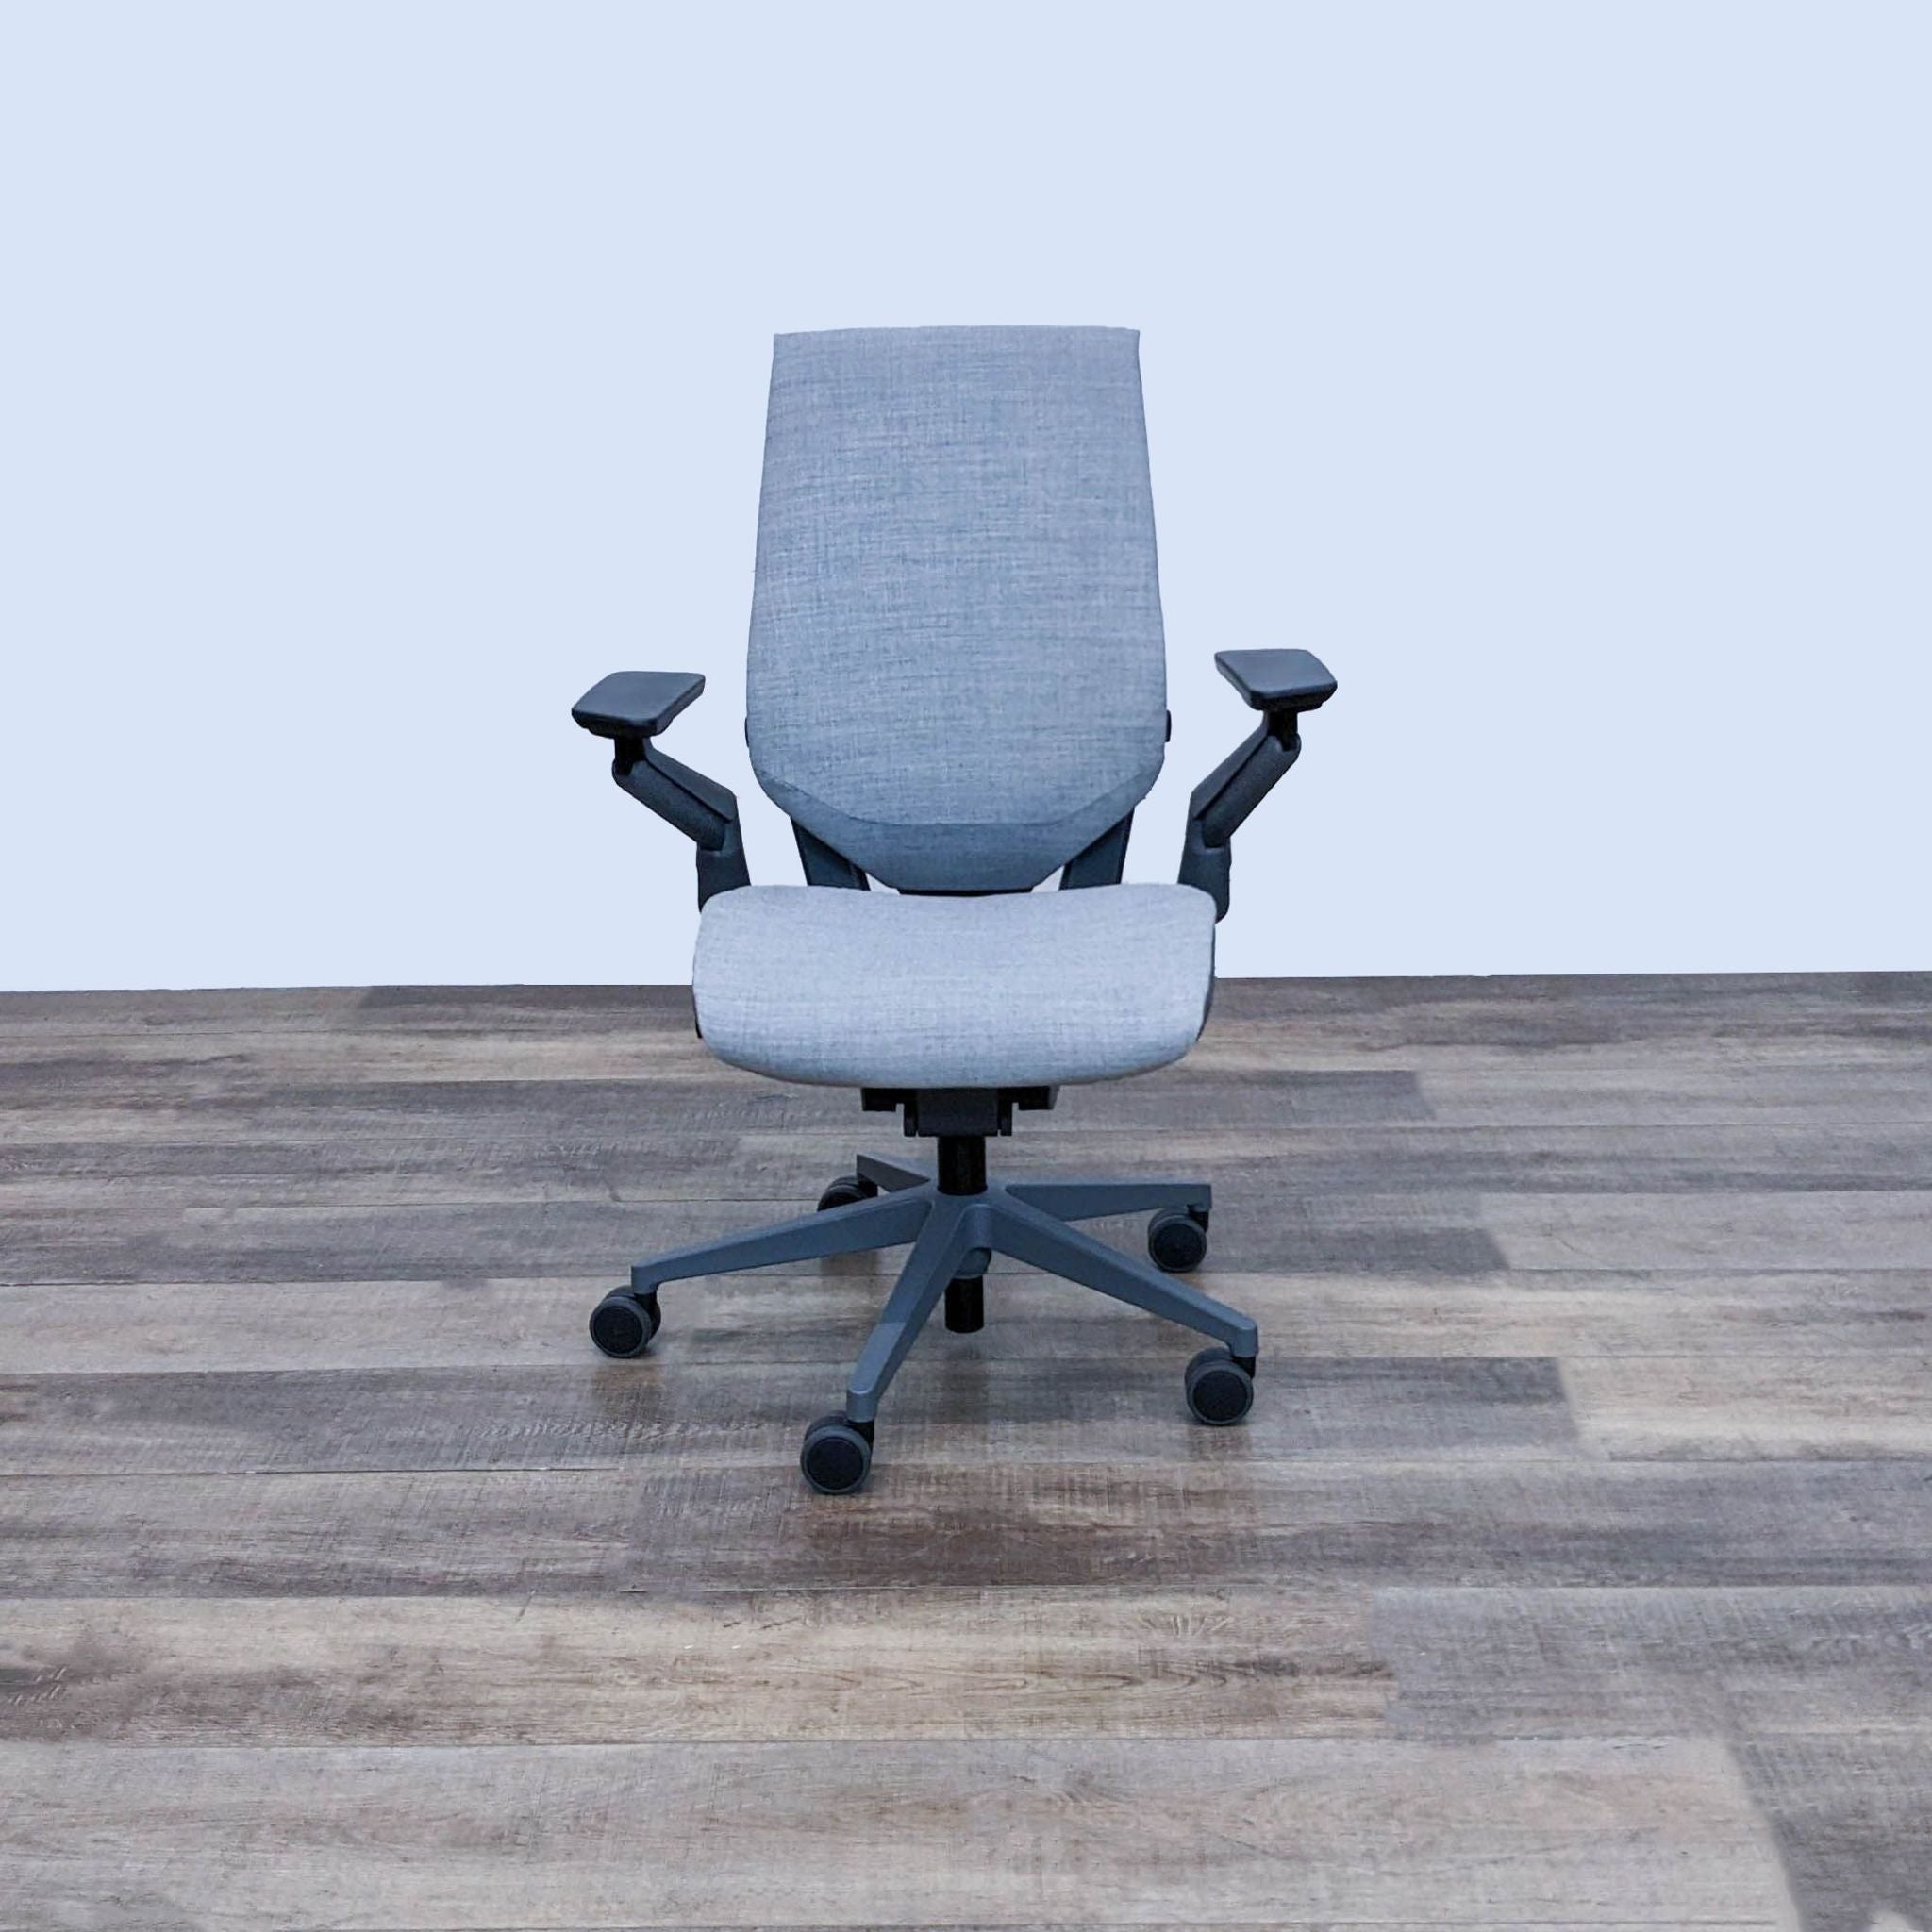 Steelcase Gesture office chair with adjustable arms and seat, pneumatic height adjustment, and recline features on a hard floor.